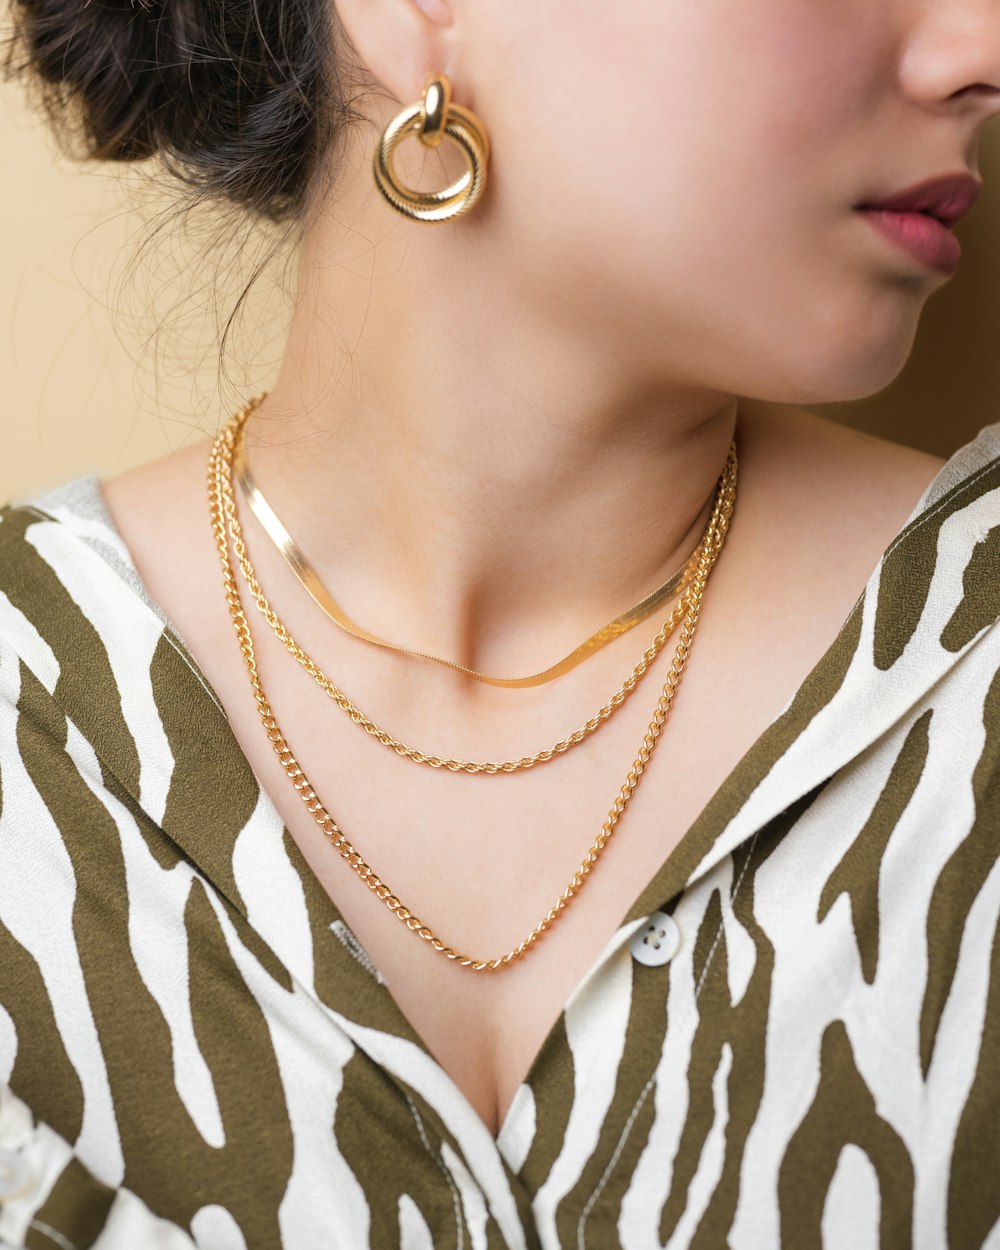 a woman wearing a zebra print shirt and a gold necklace